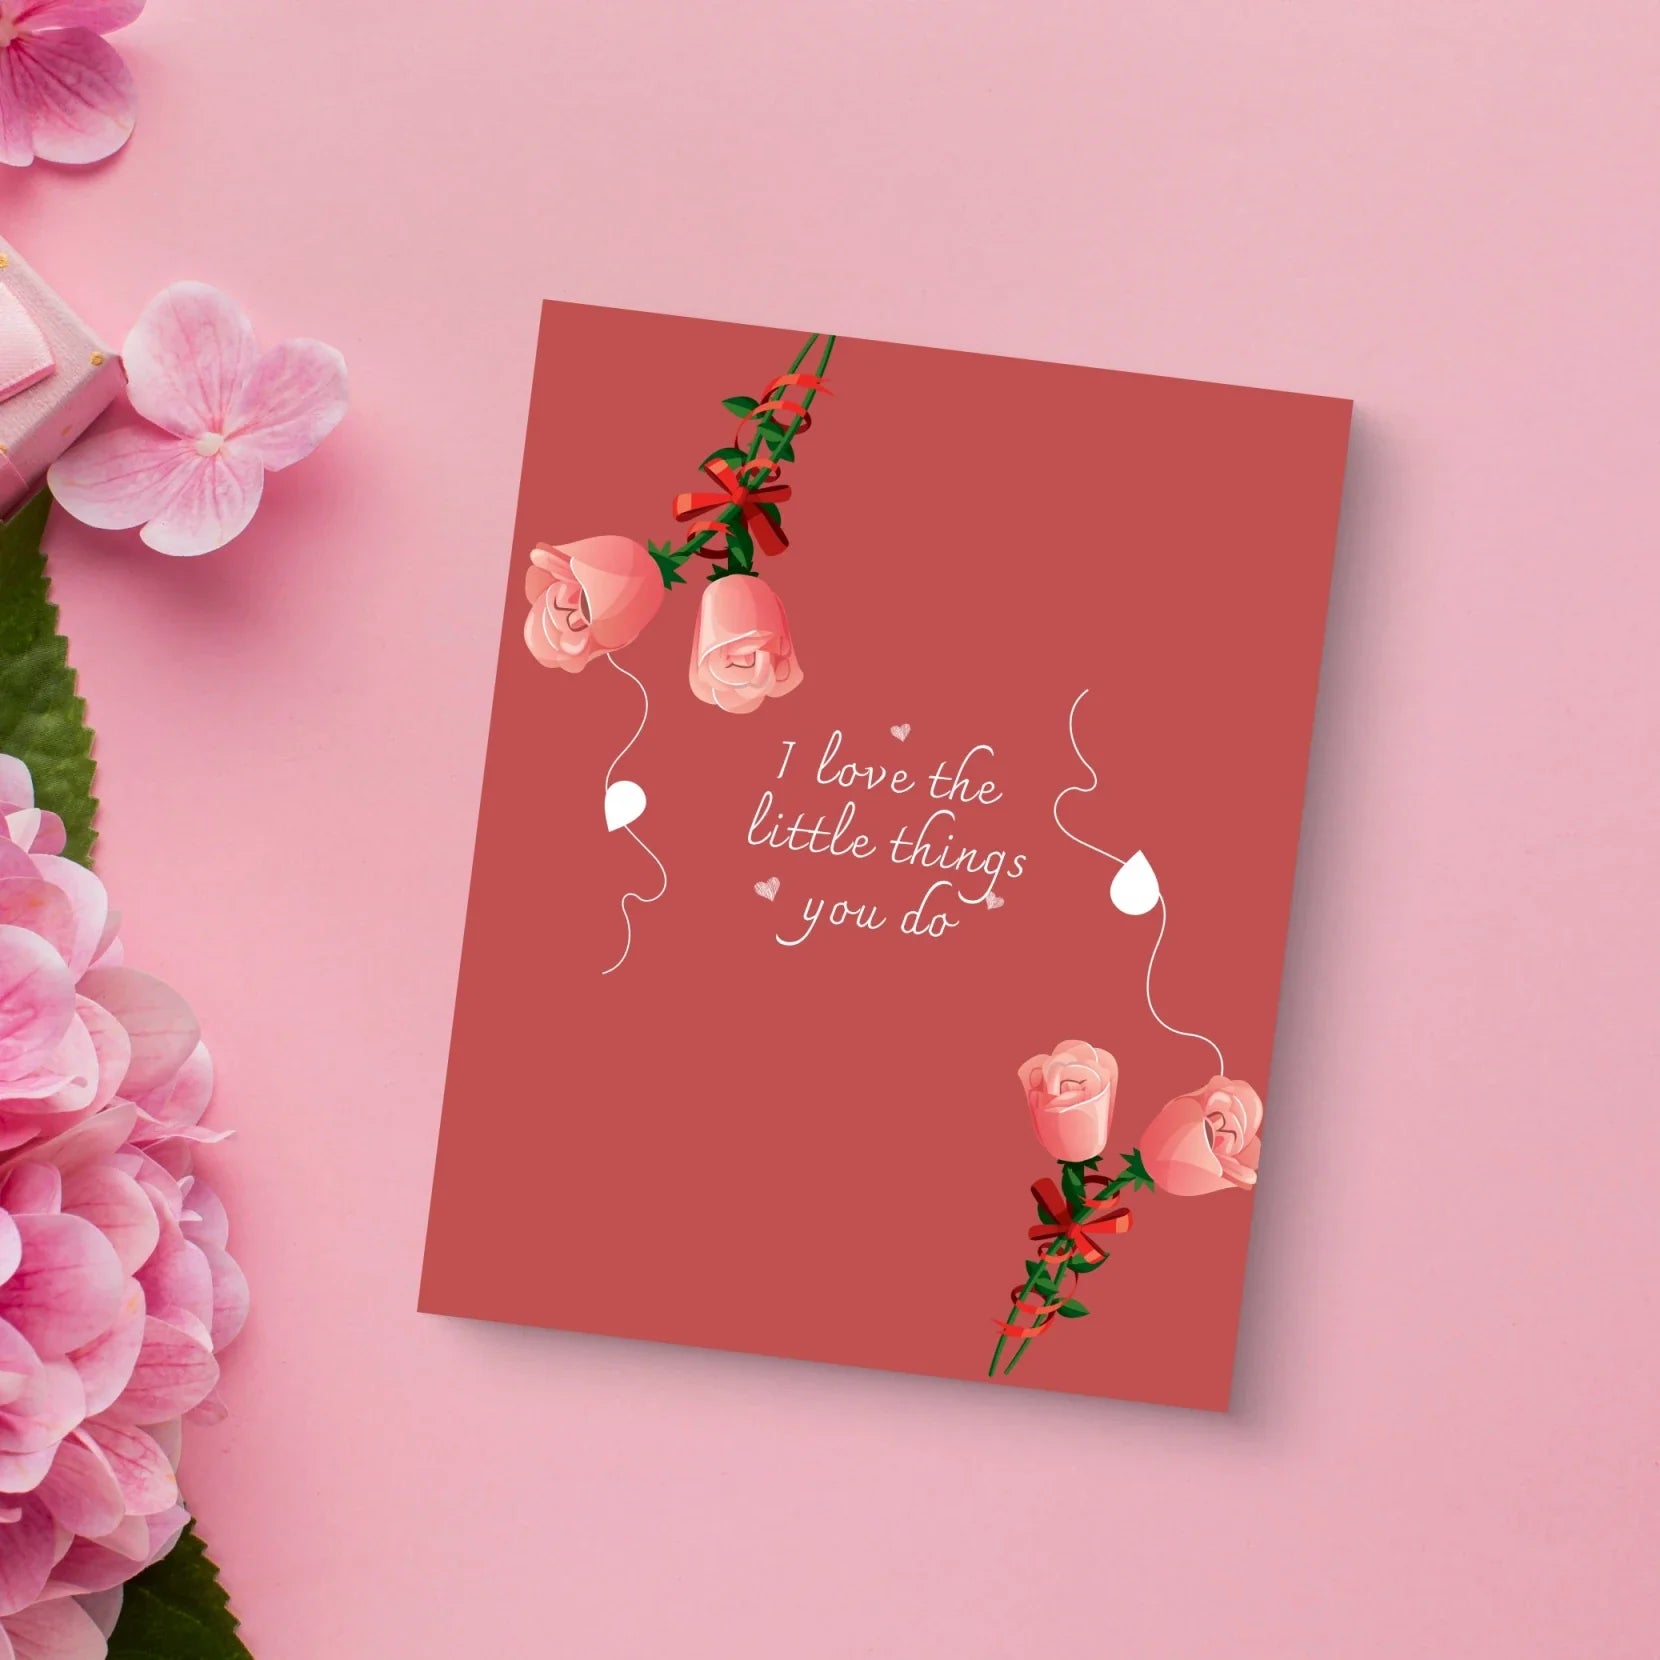 "Add a romantic valentine postcard to send across some special words "